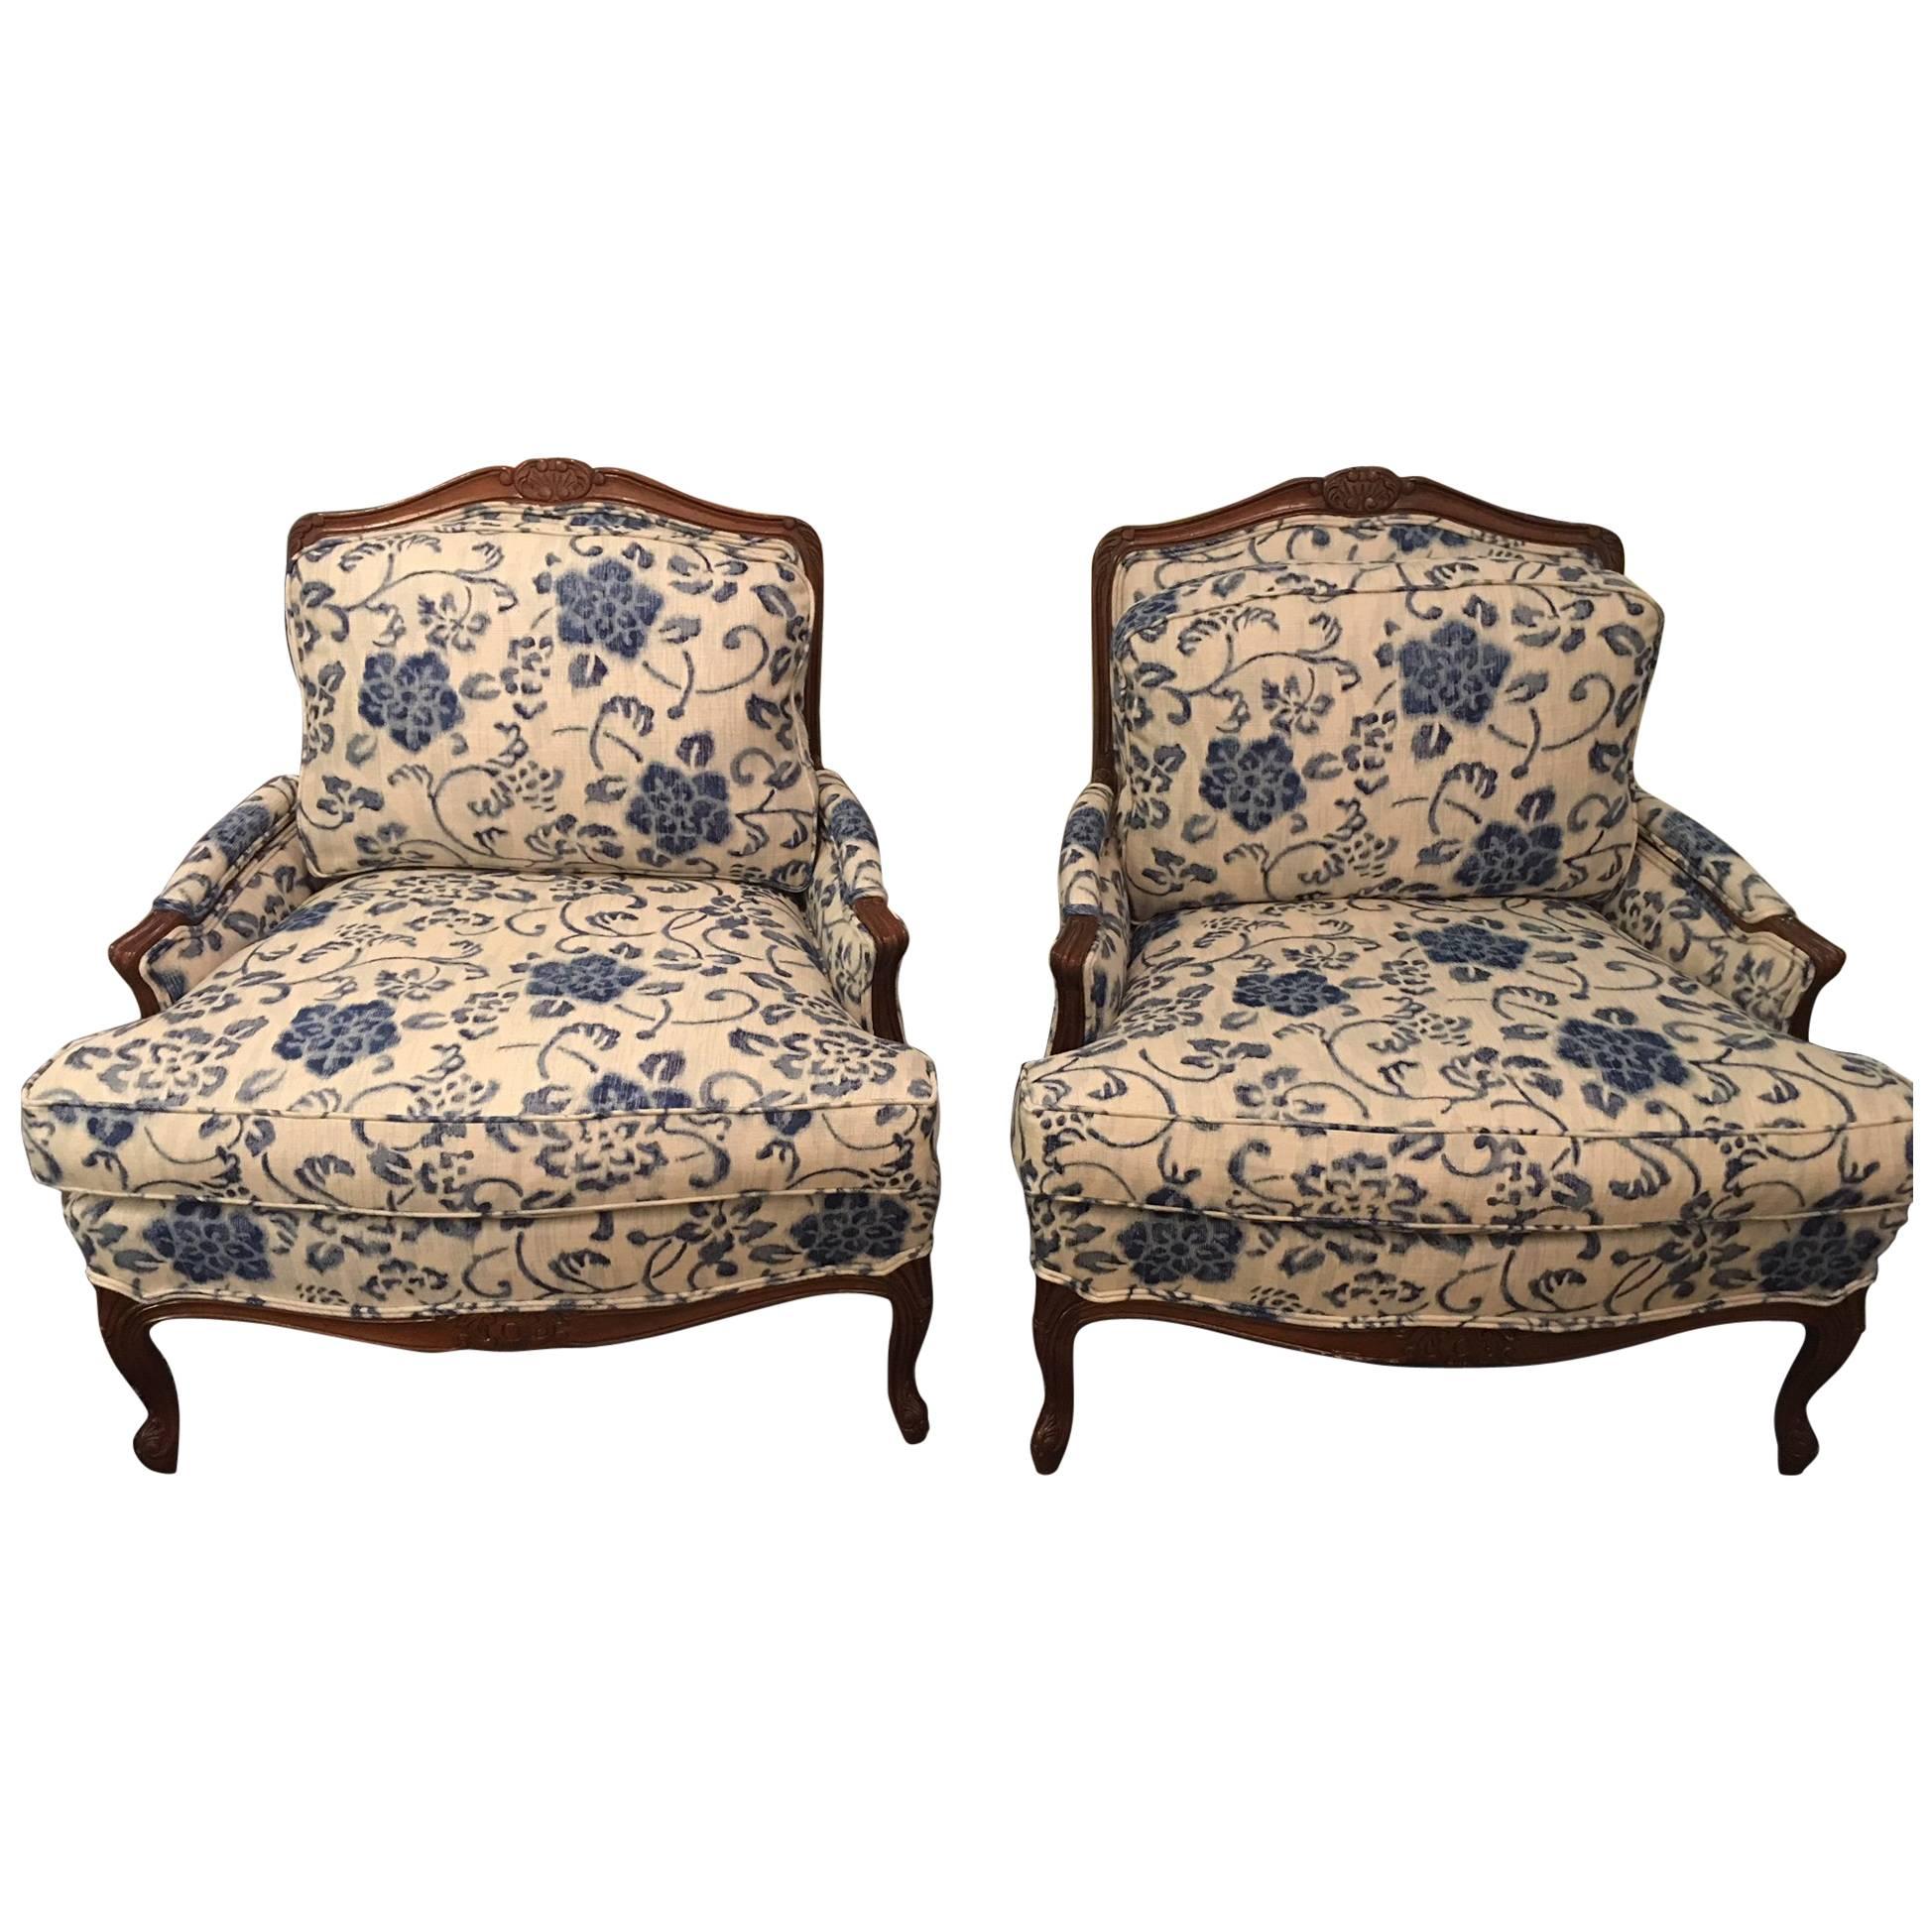 Pair of Taylor King Bergere Chairs